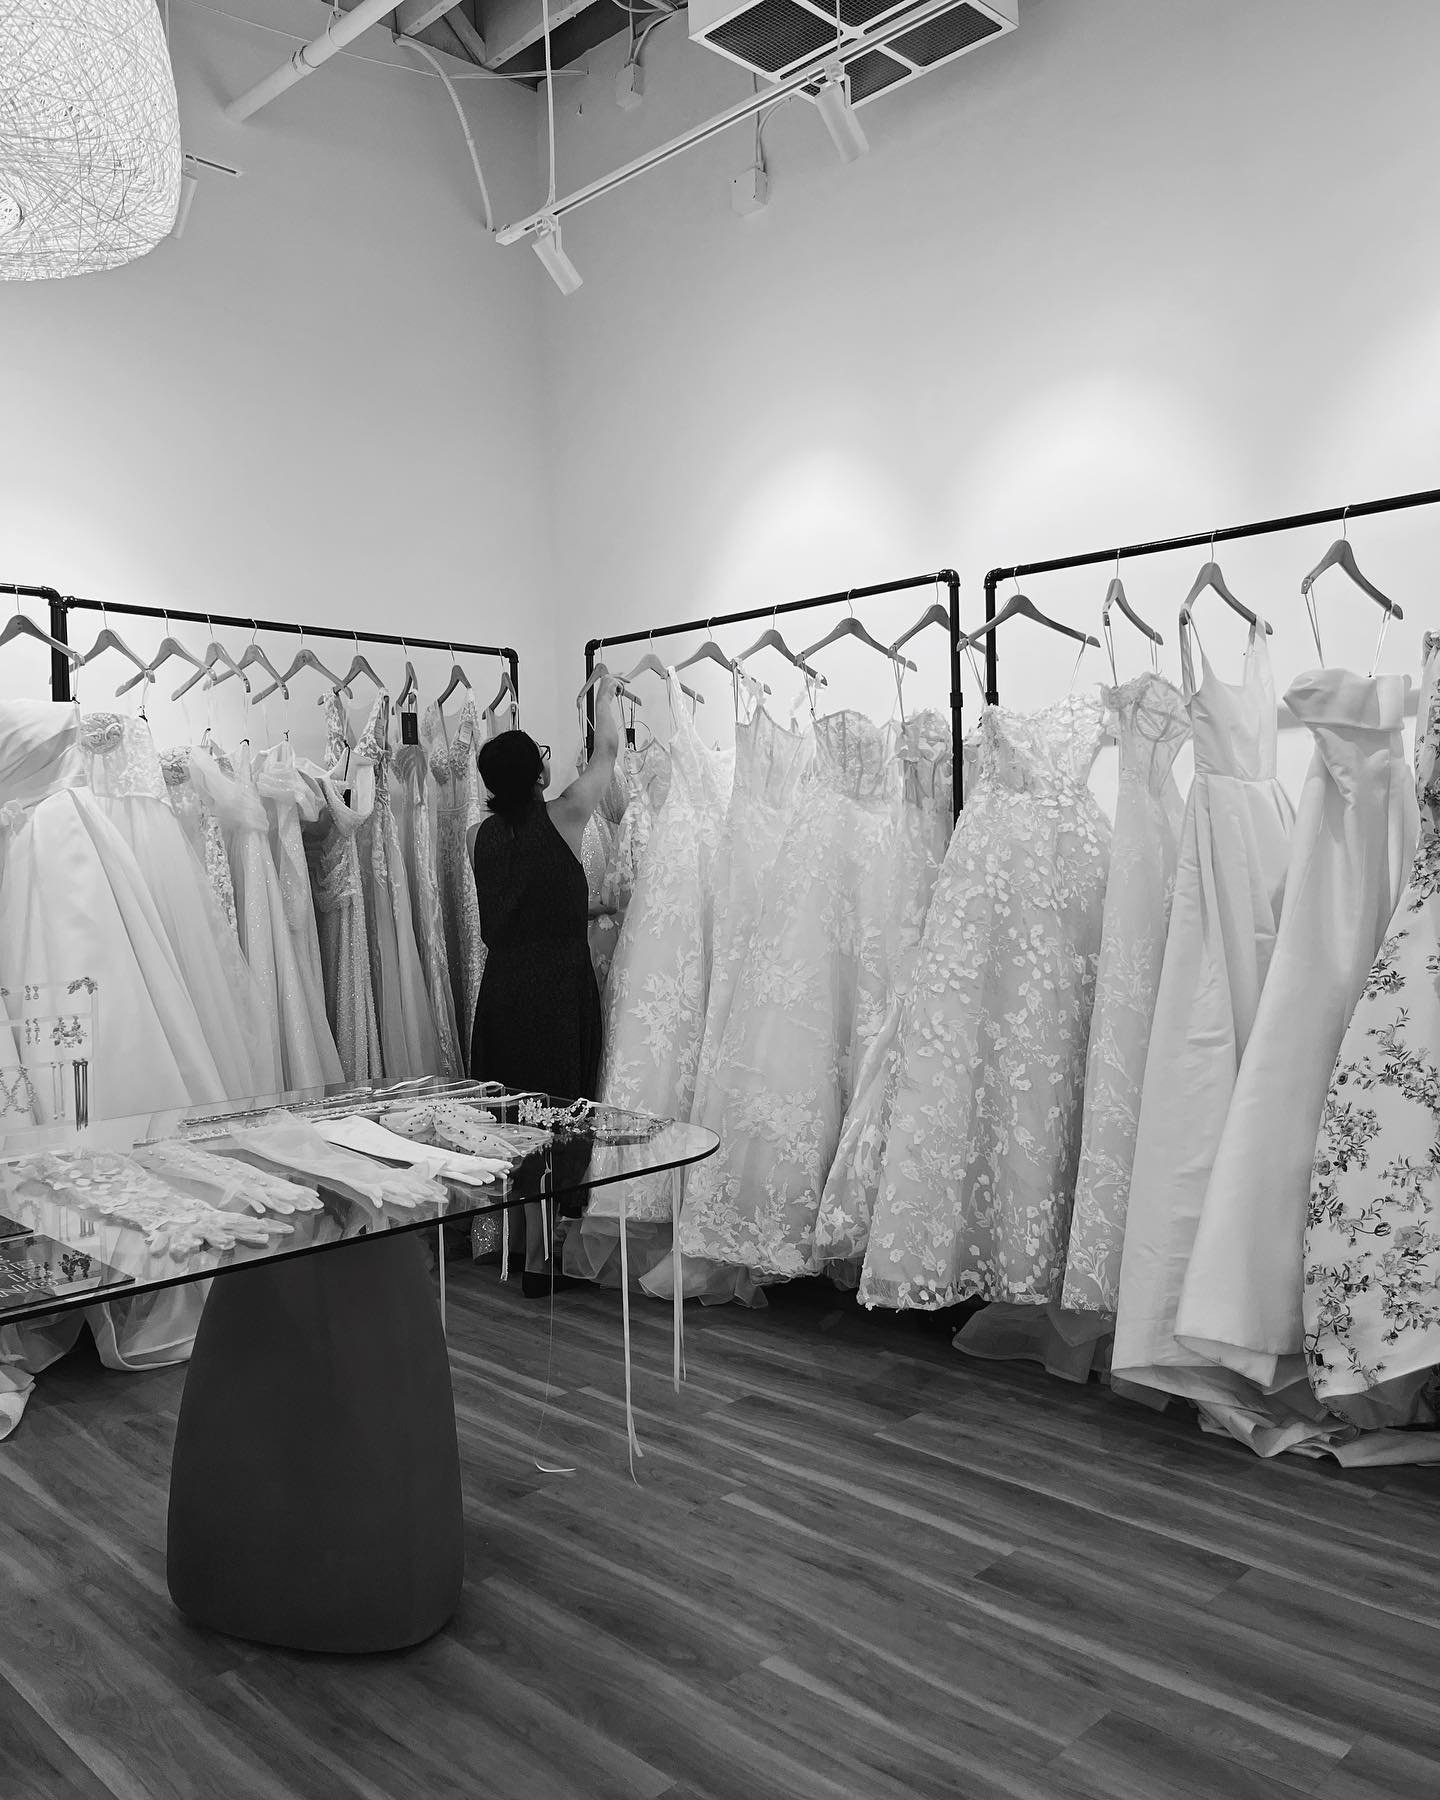 nestled in the north loop of minneapolis, you&rsquo;ll find a luxe and intimate hidden gem bridal boutique serving classic and modern brides alike + this weekend only, you&rsquo;ll also find an exclusive trunk show event. 🖤

may 31-june 2 is your ch